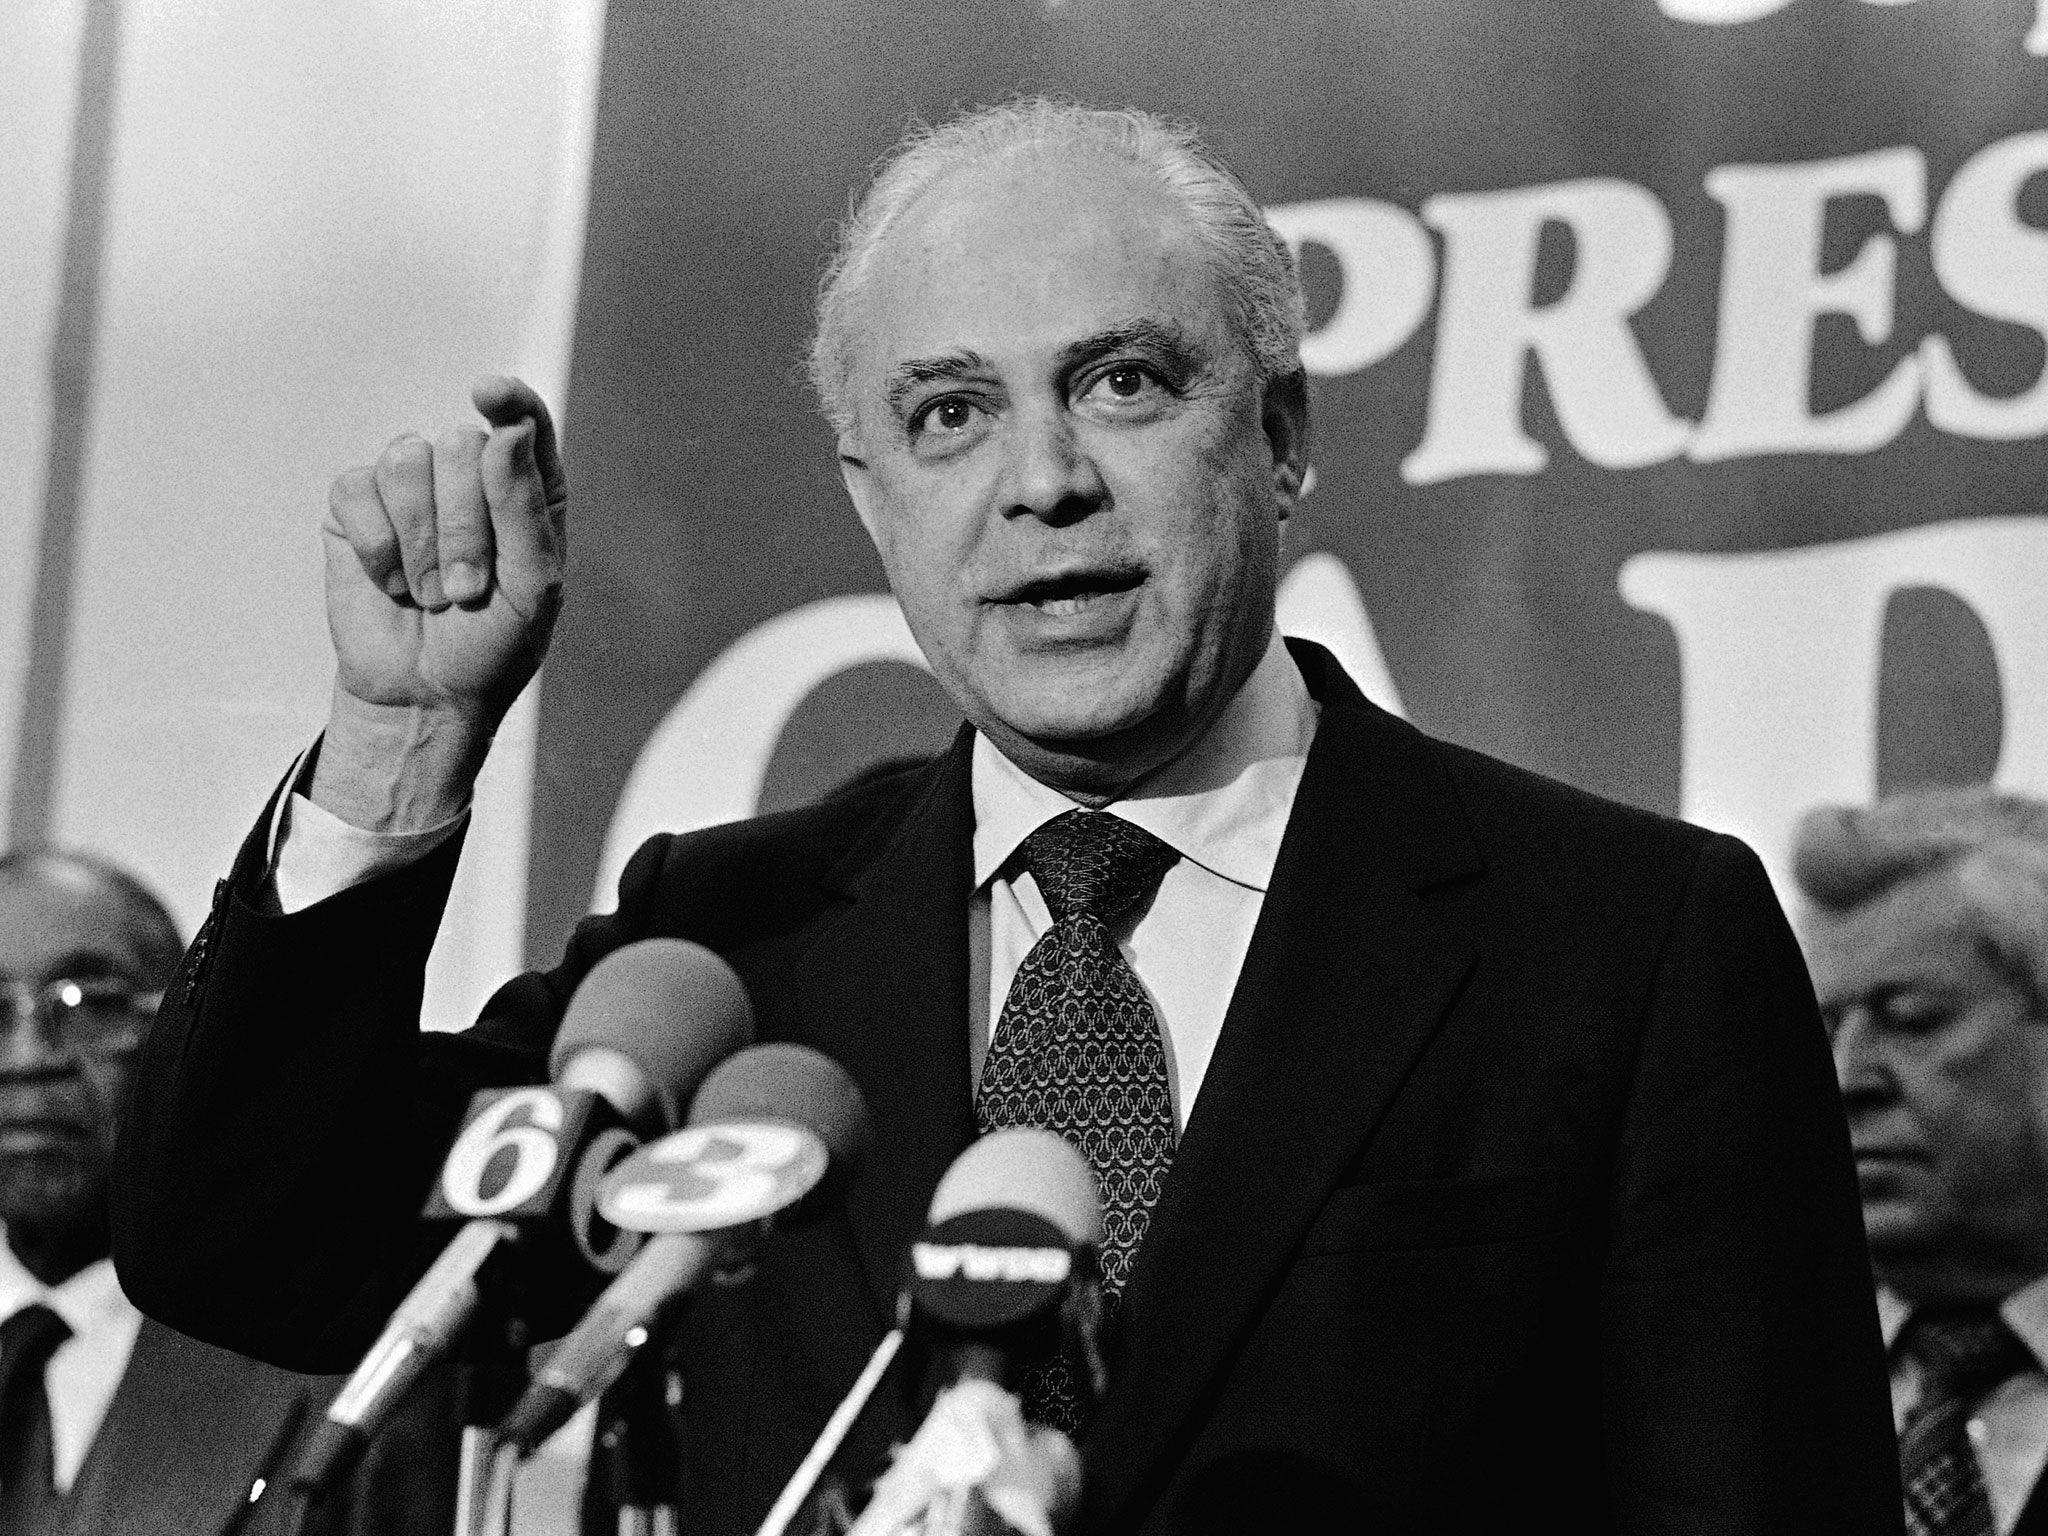 Strauss on the campaign trail for Jimmy Carter in 1980